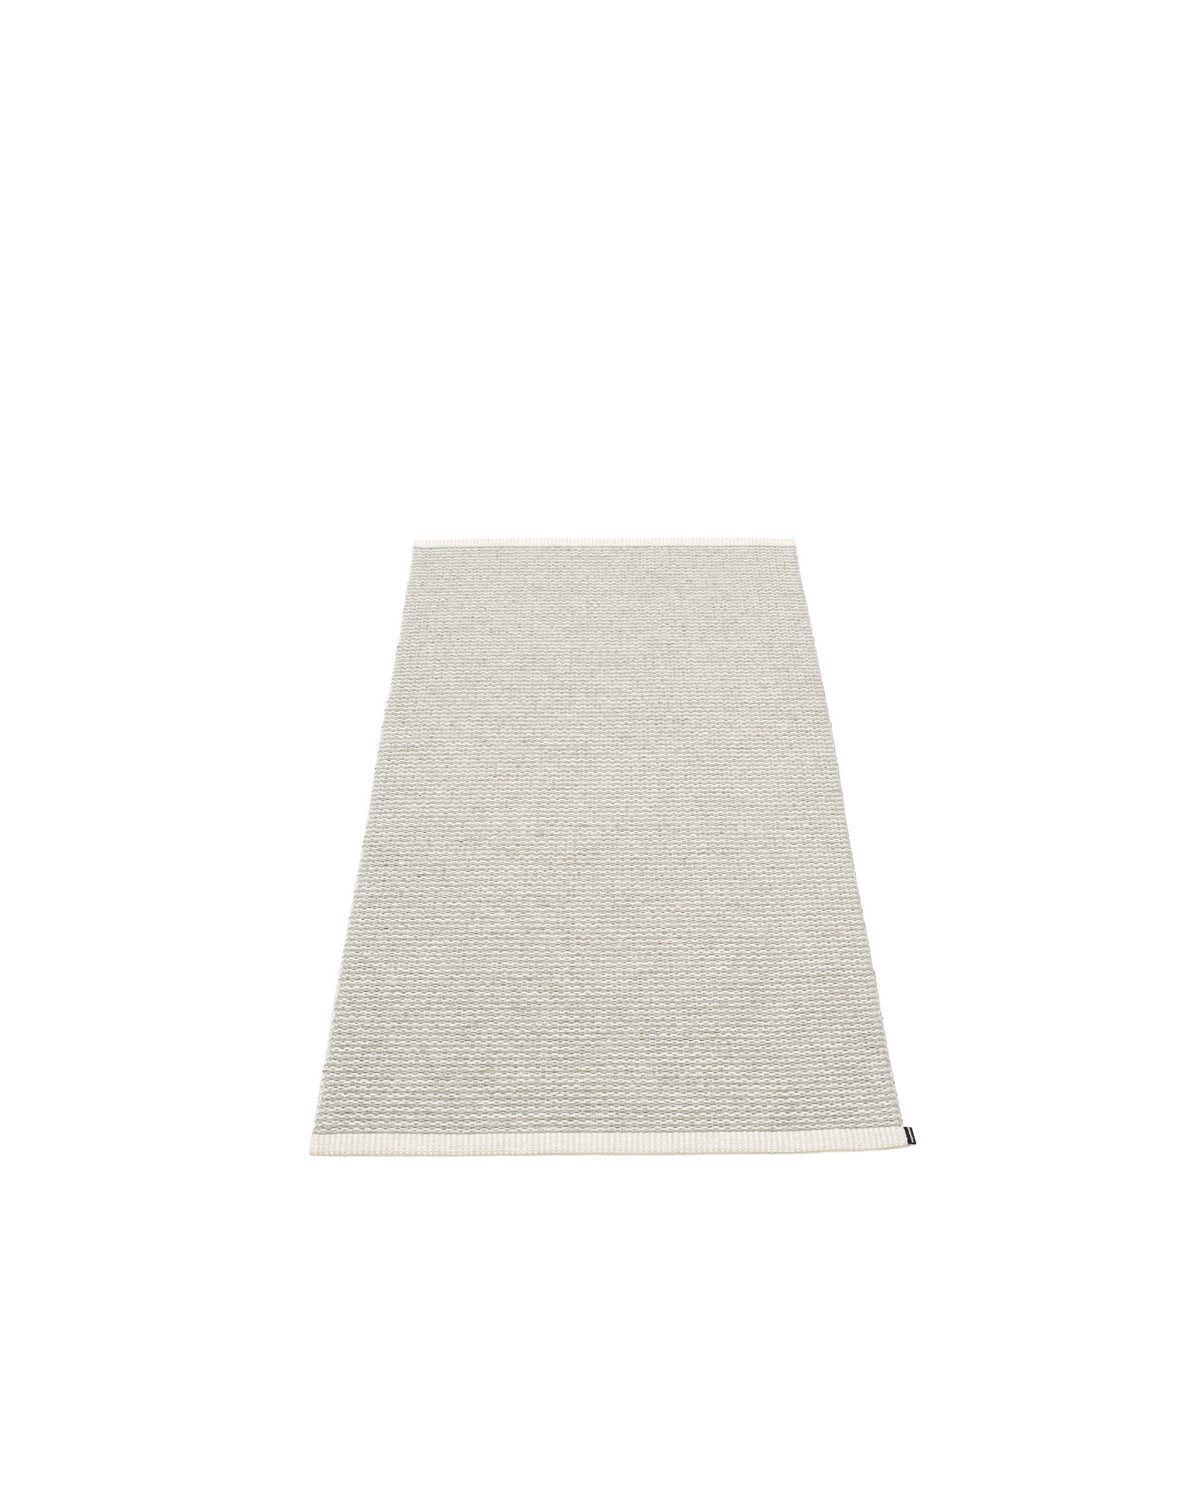 Pappelina Rug MONO Fossil Grey  image 3